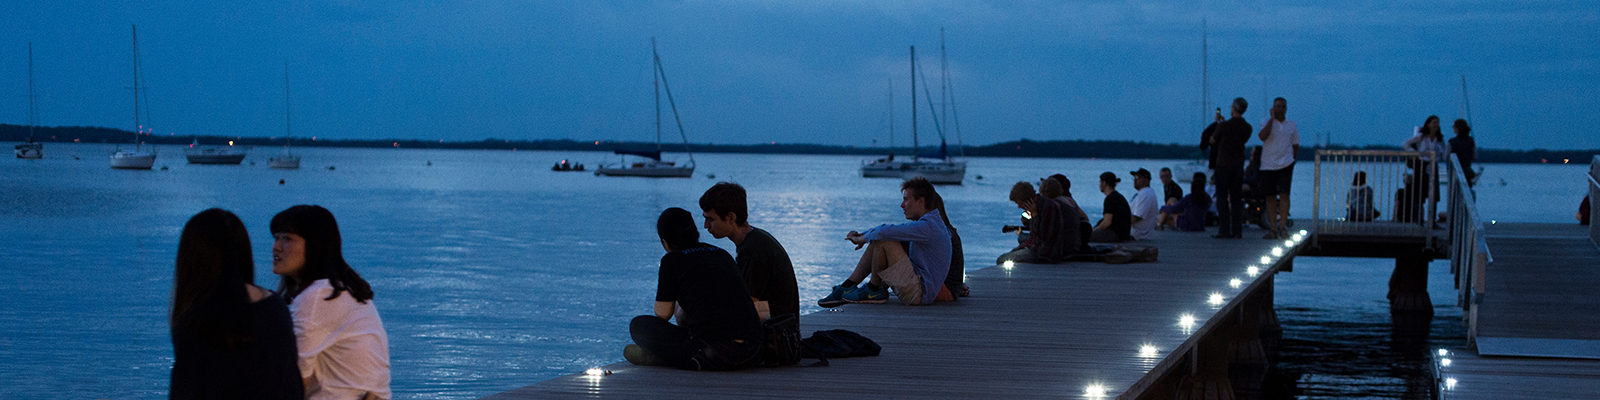 As dusk falls to nighttime, people relax on the Goodspeed Family Pier and take in a post-sunset view of the Memorial Union Terrace and Lake Mendota shoreline at the University of Wisconsin-Madison during a summer evening on June 14, 2014. (Photo by Jeff Miller/UW-Madison)